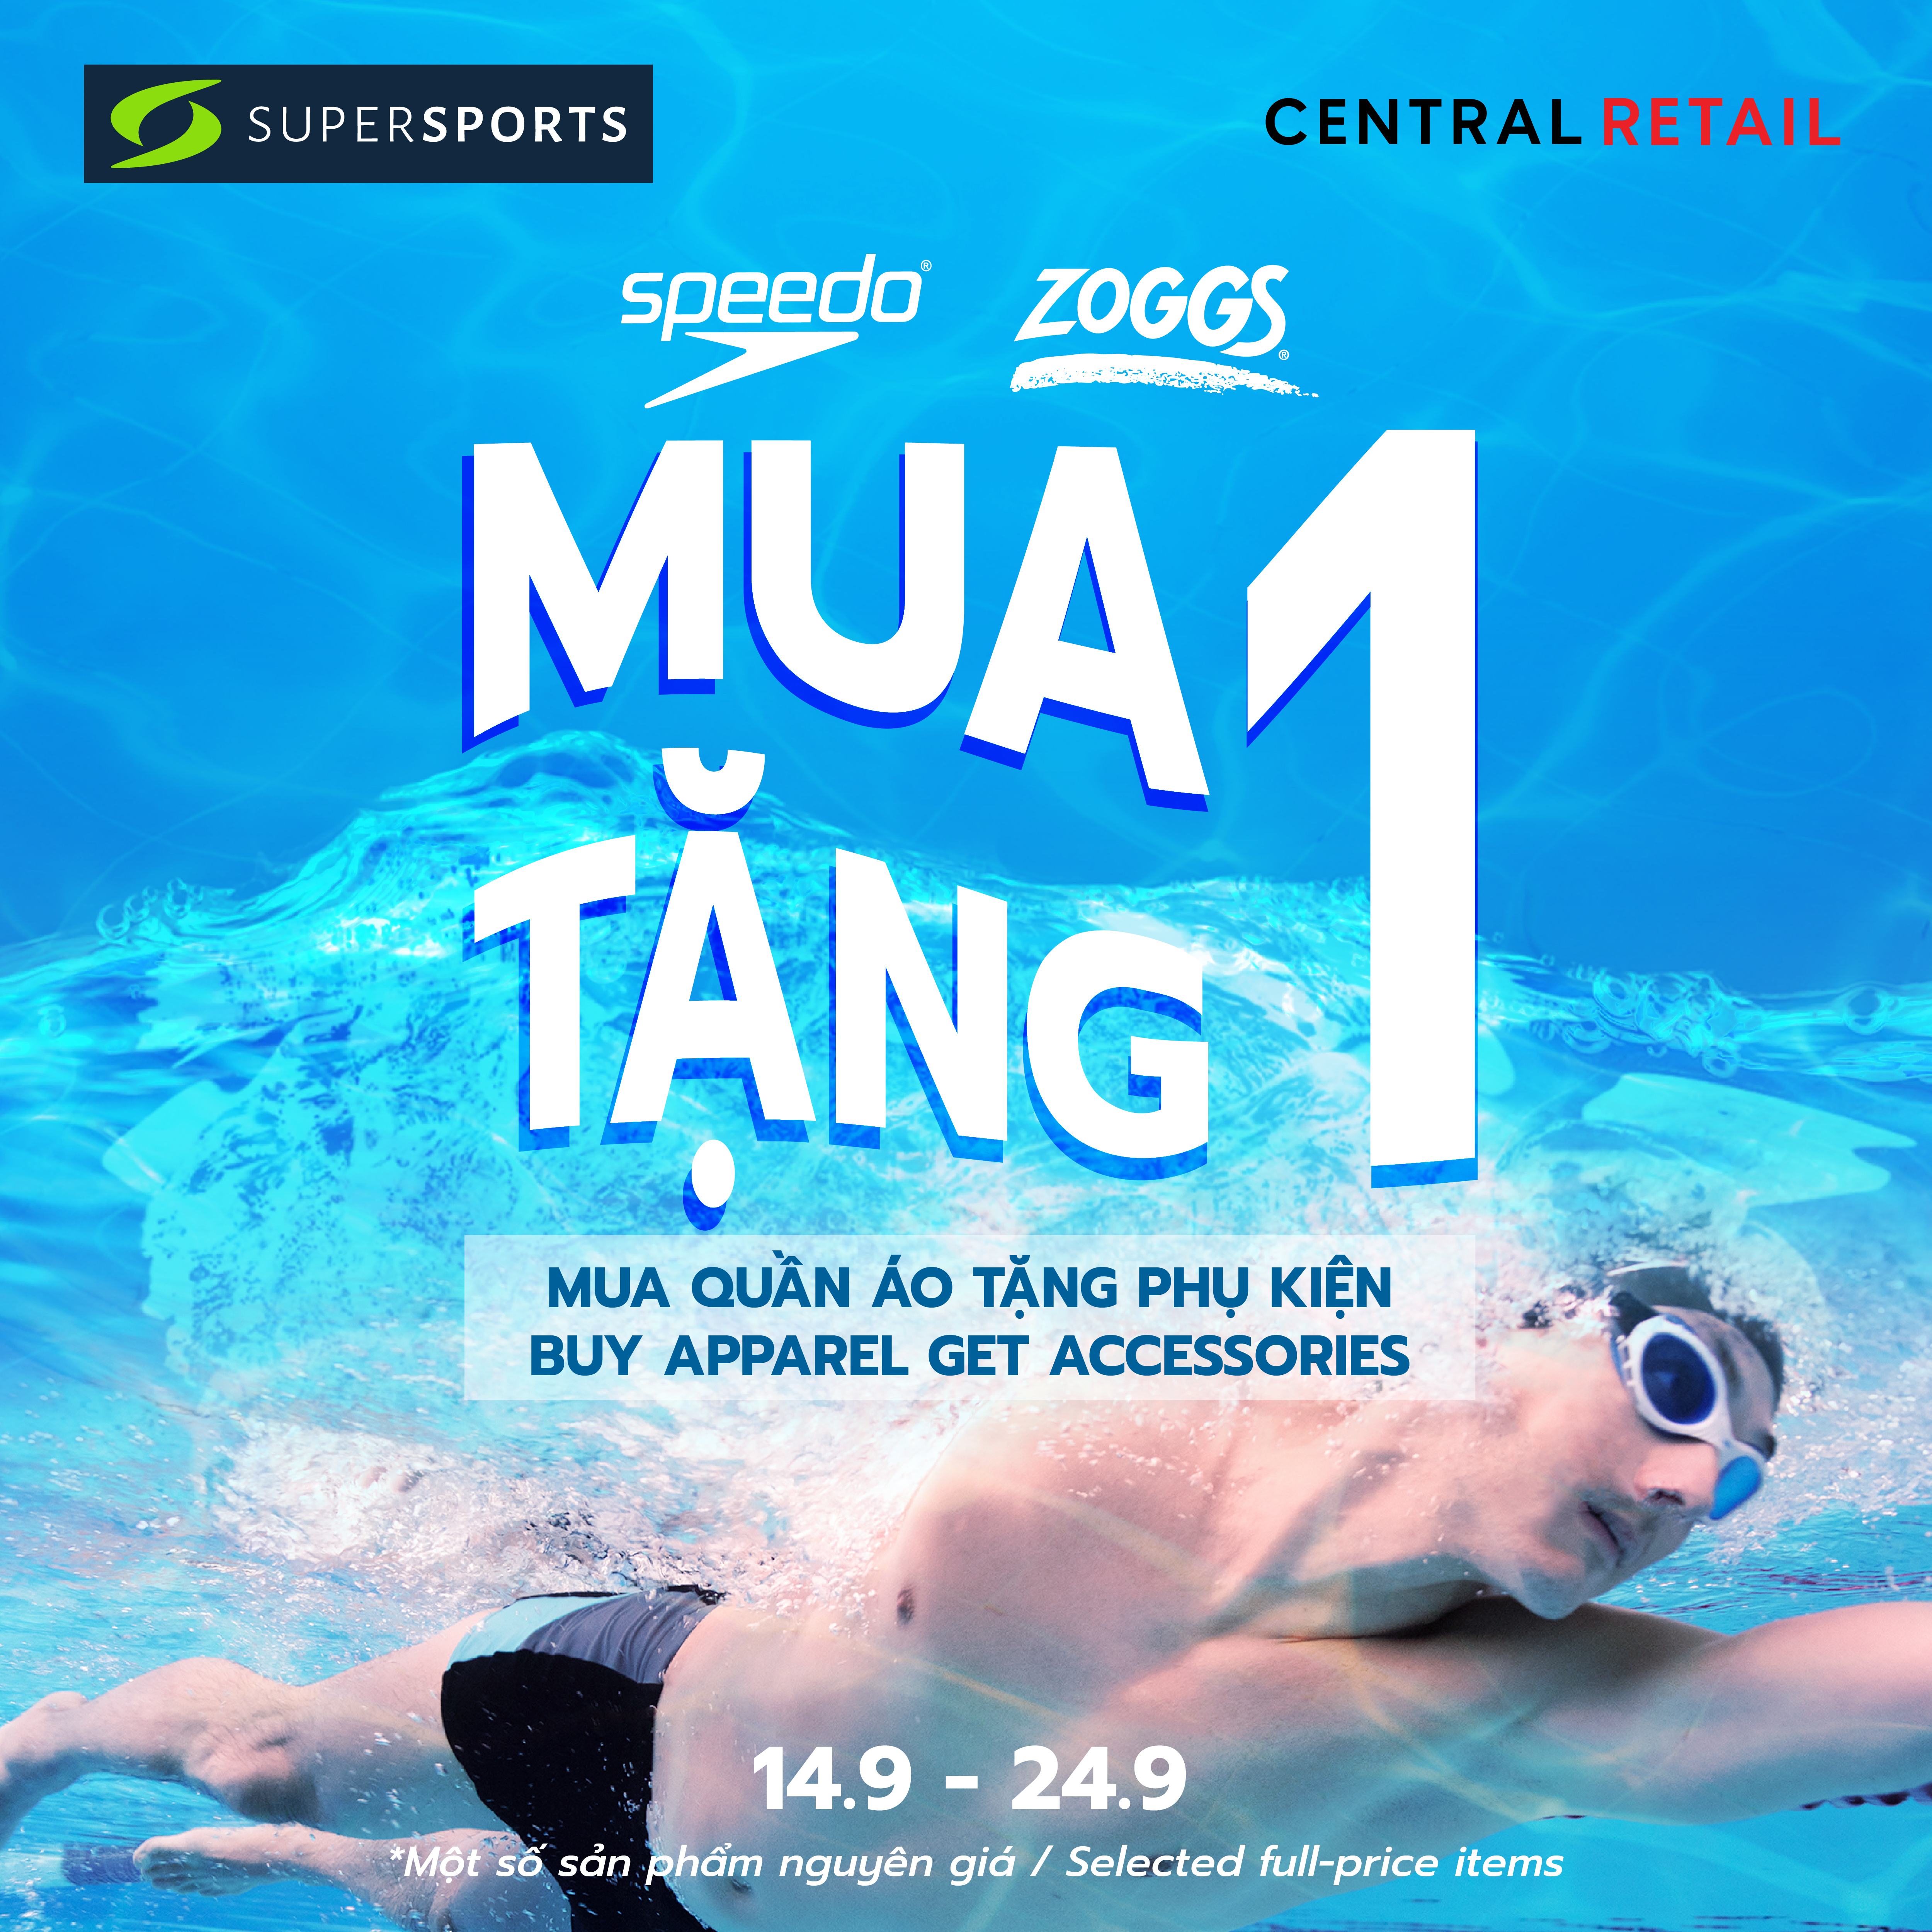 ENJOY "THE BLUE RACE” 🏊‍♀️ - TAKE NEW SUPERDEAL from SUPERSPORTS